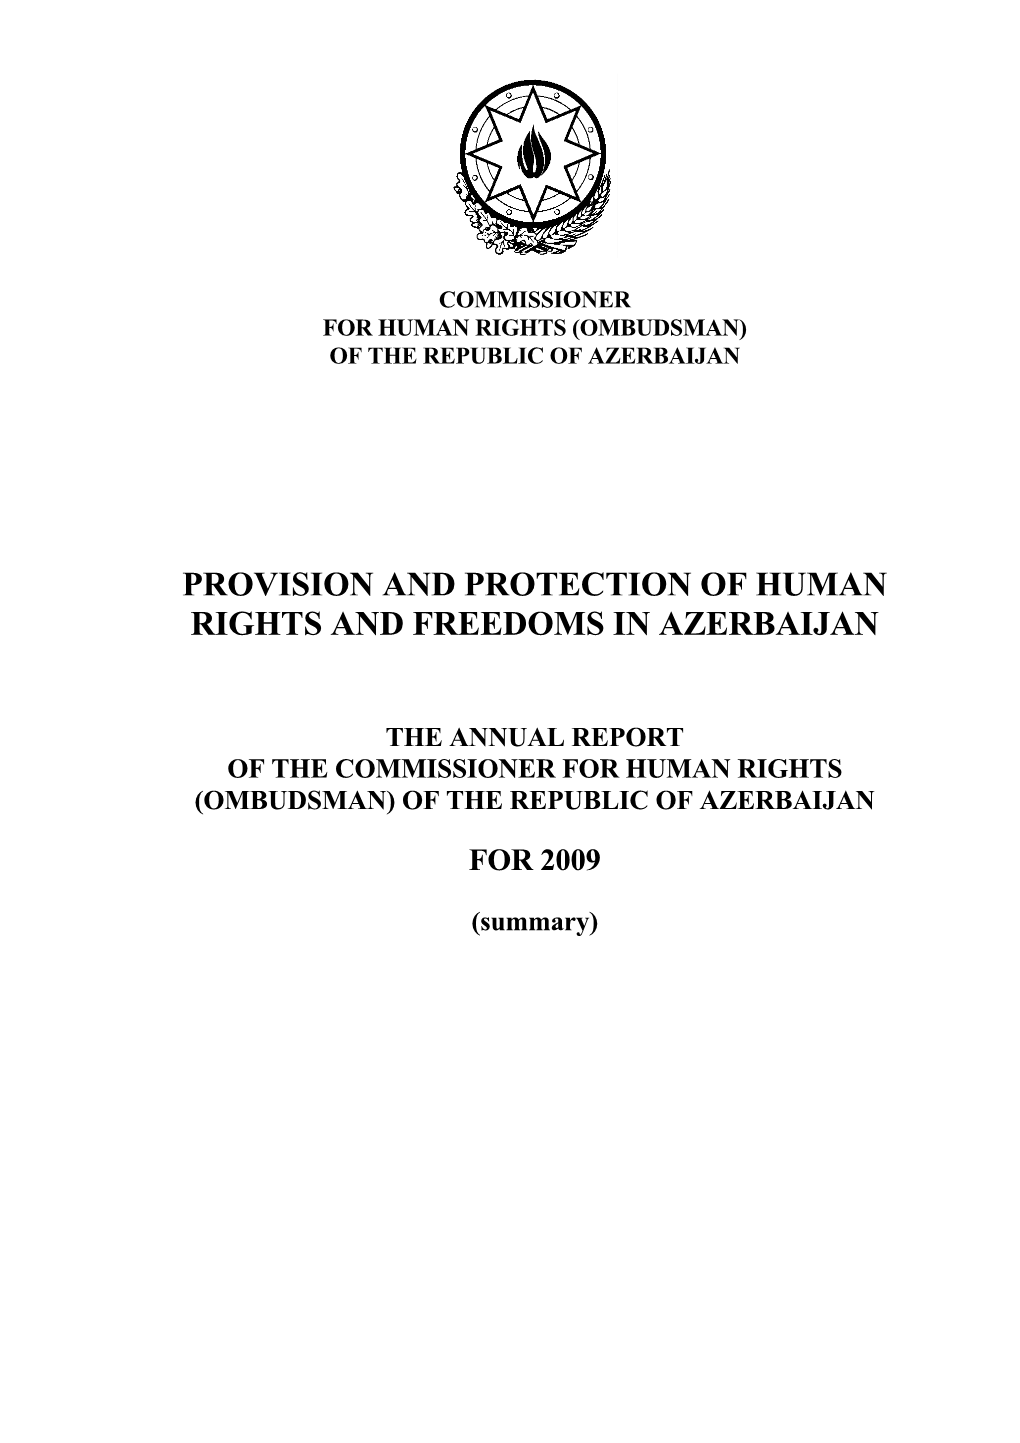 Provision and Protection of Human Rights and Freedoms in Azerbaijan